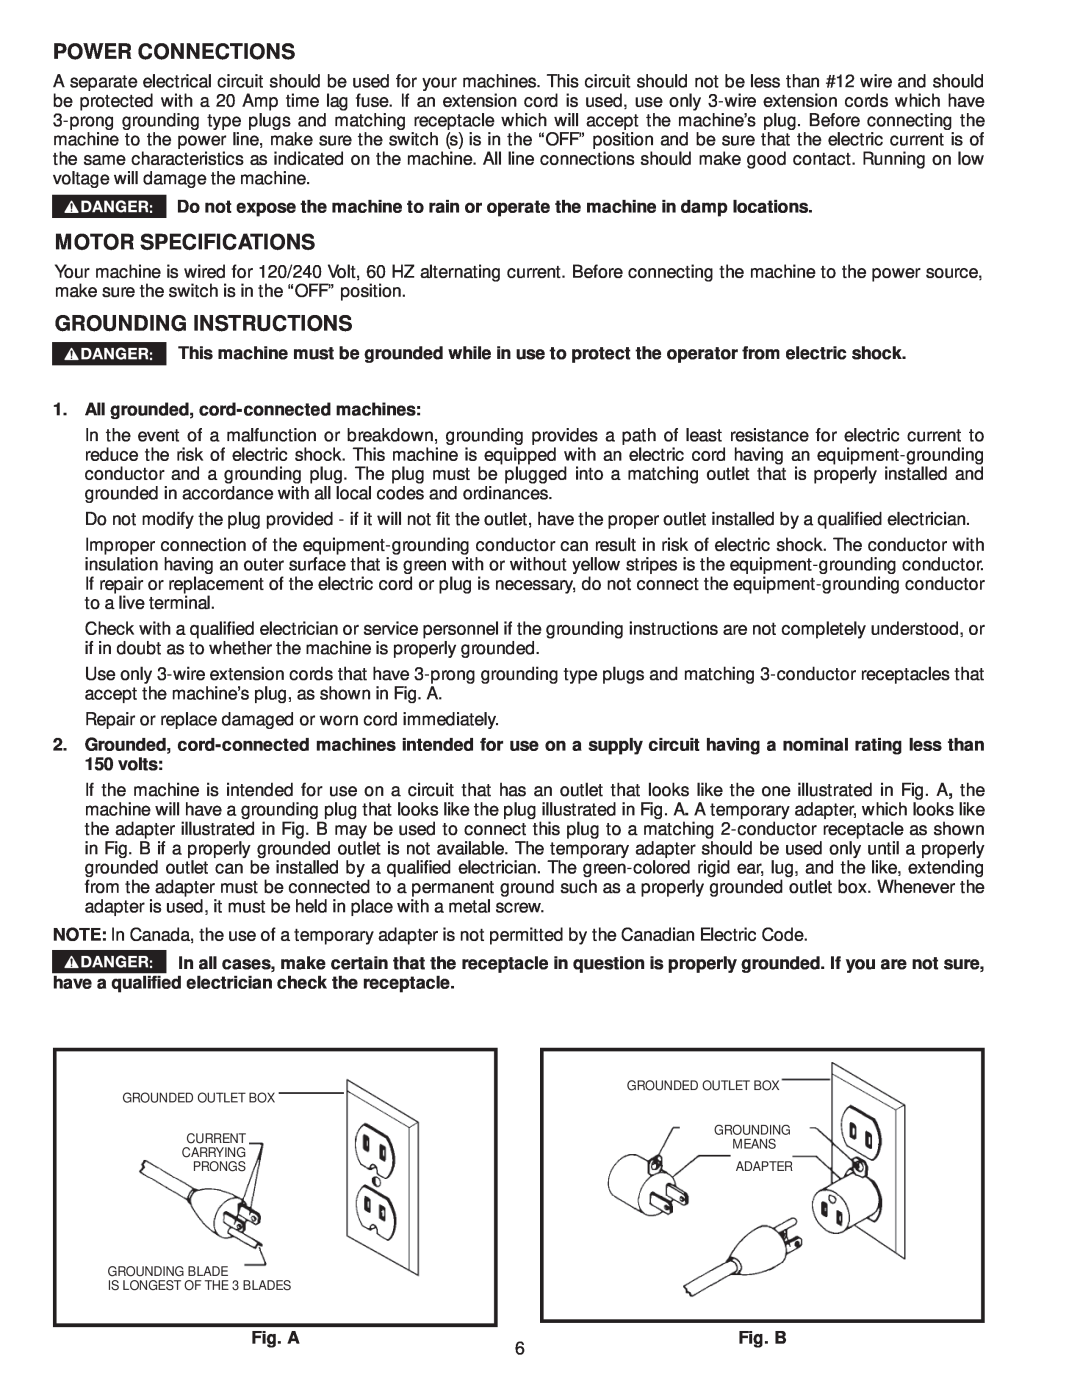 Delta 36-979, 36-978 instruction manual Power Connections, Motor Specifications, Grounding Instructions 